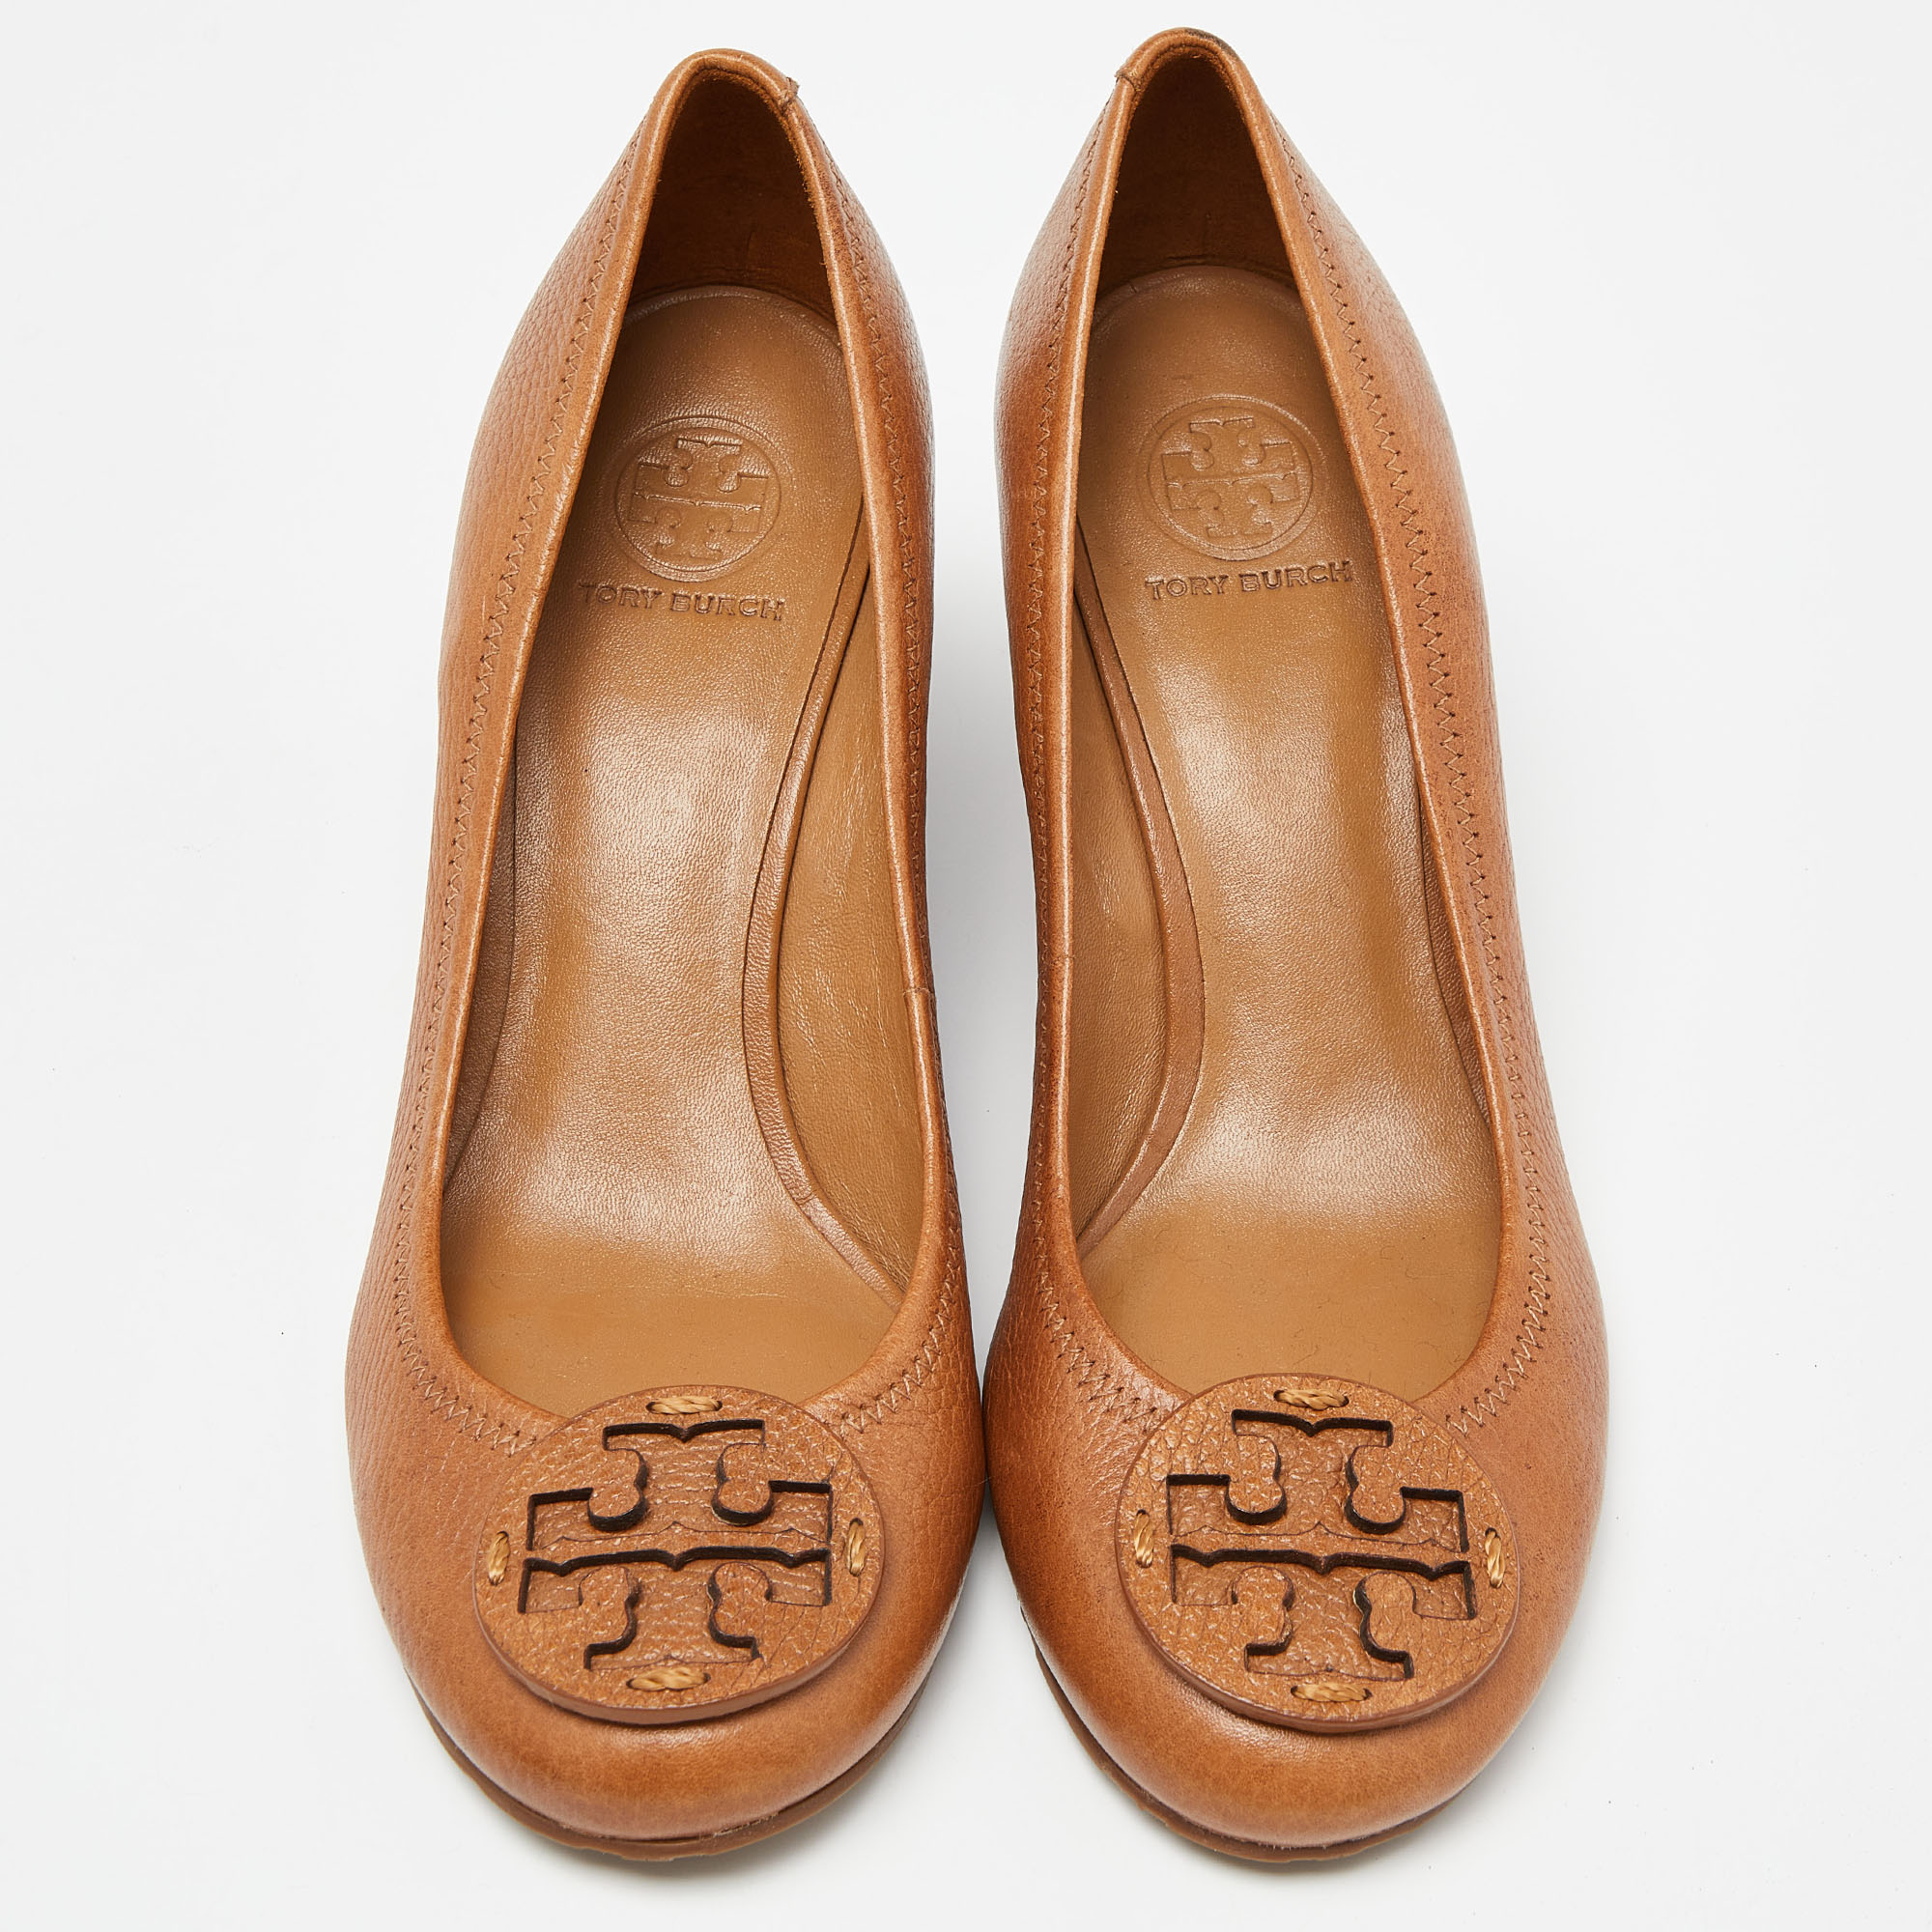 Tory Burch Brown Leather Sally Wedge Pumps Size 40.5